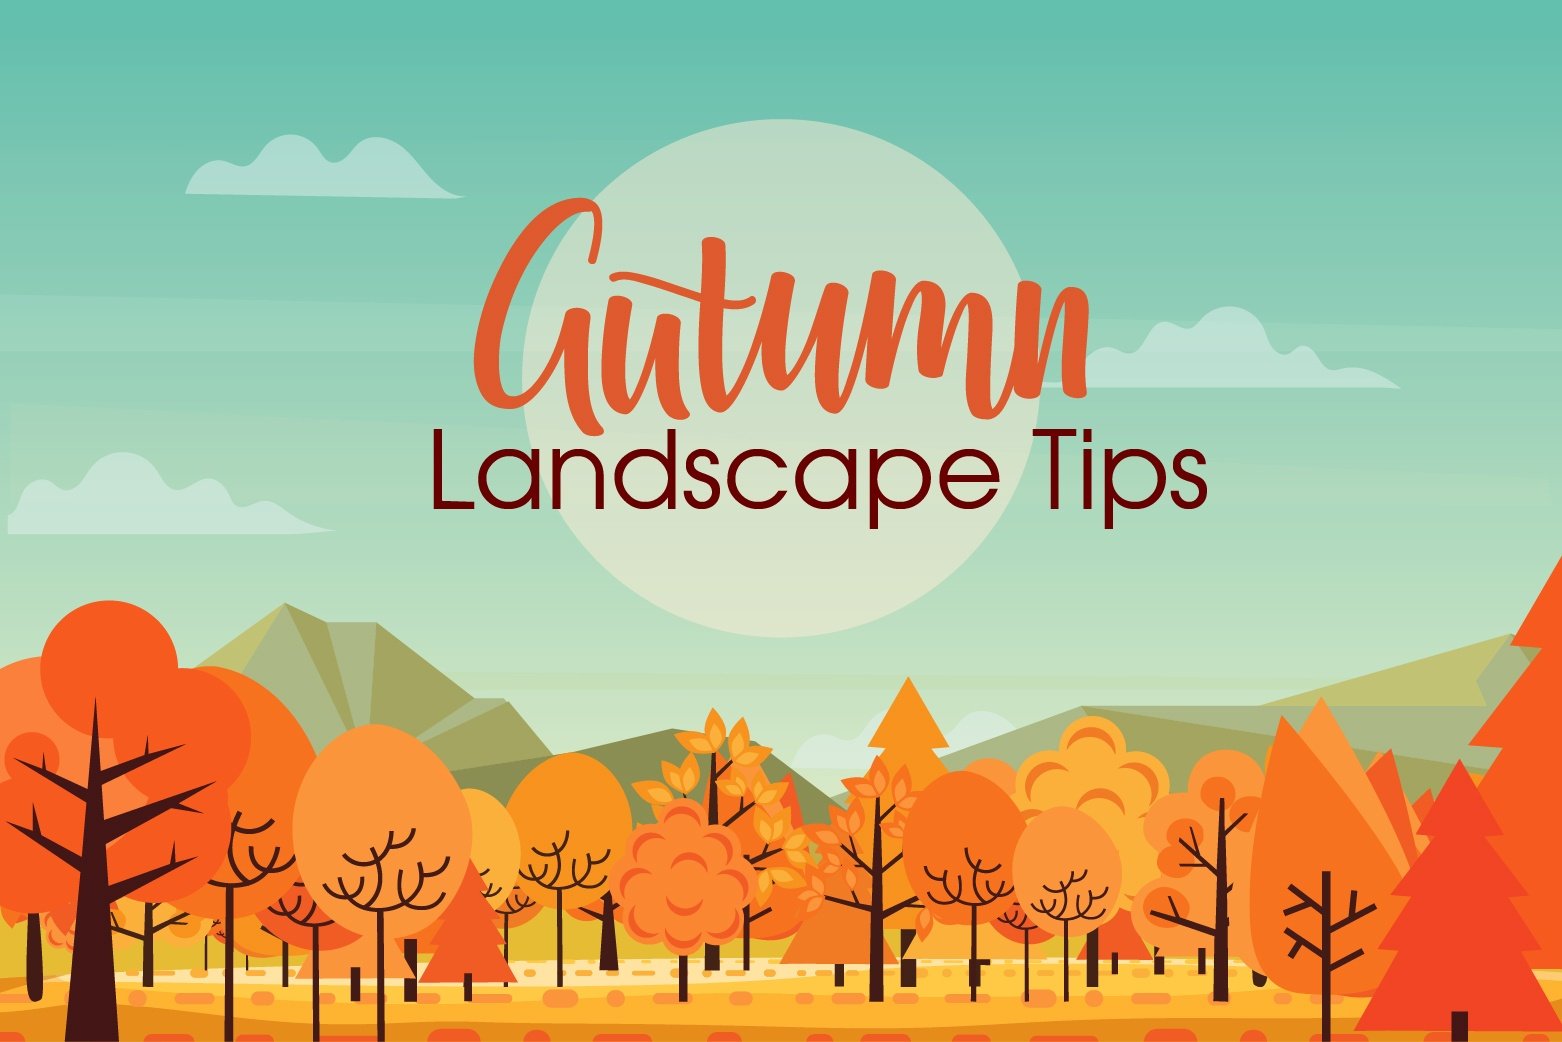 Landscaping Tips to Do Every Autumn